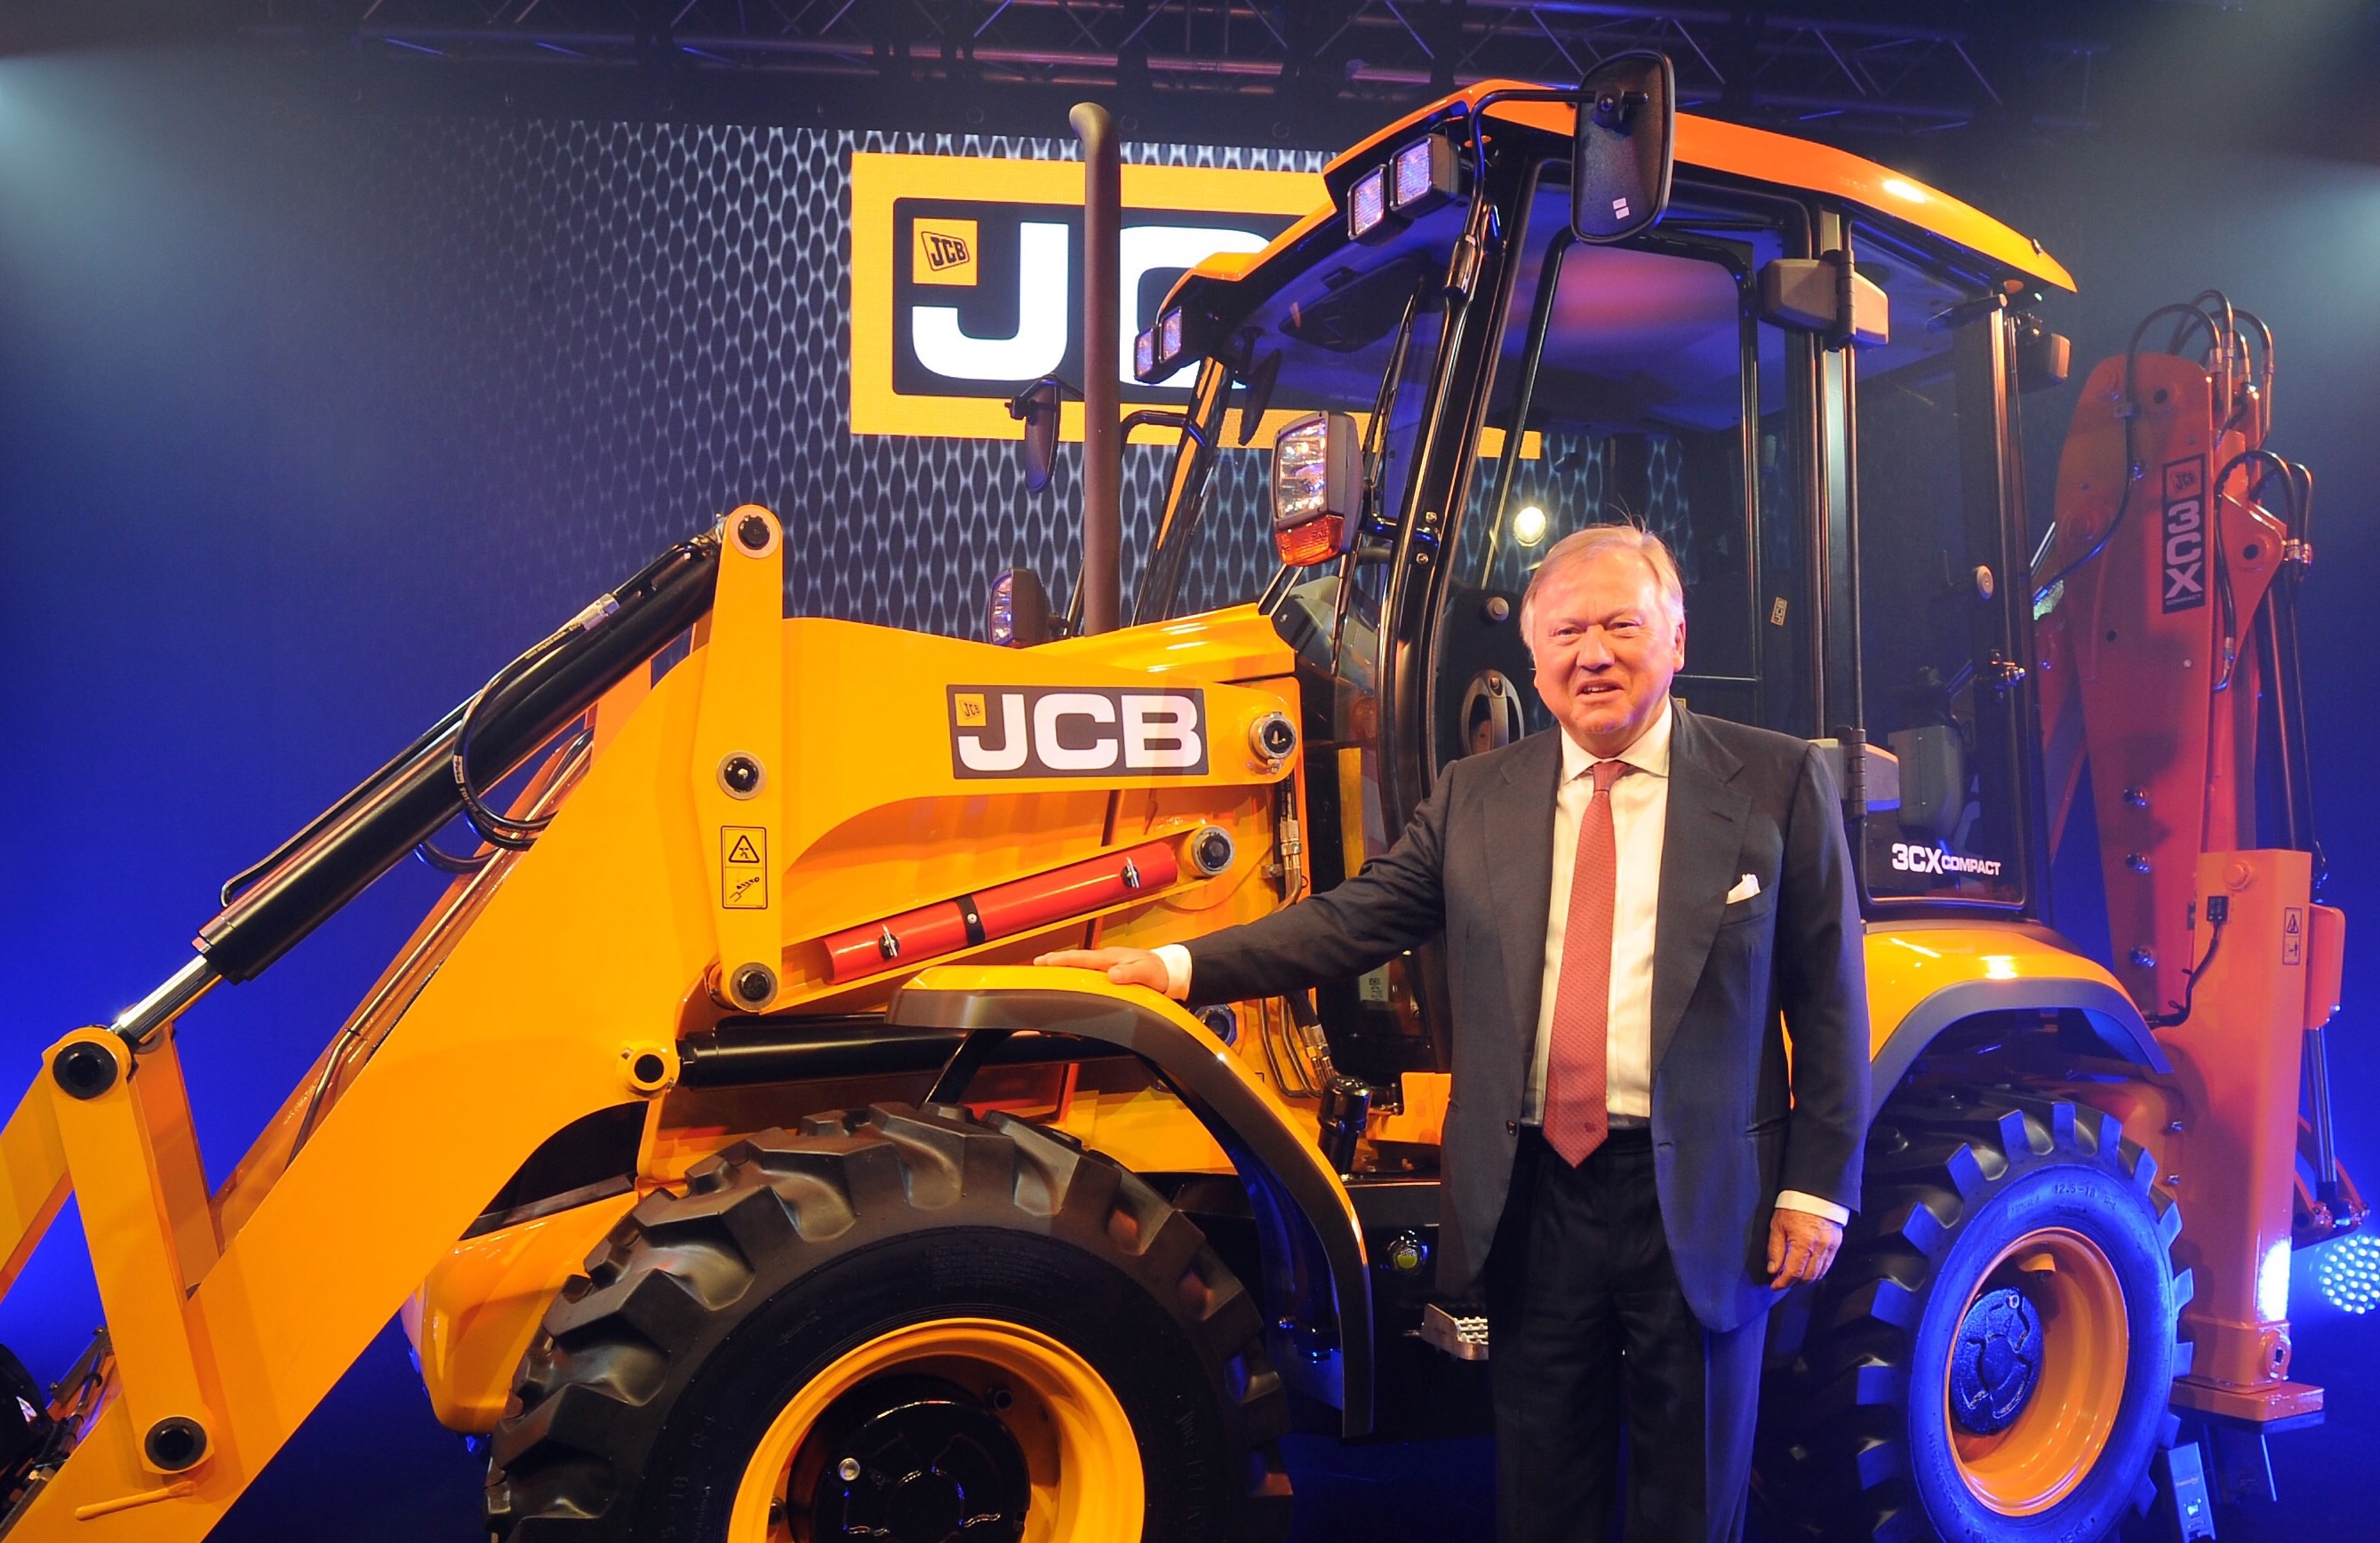 JCB trades in more than 150 countries across the world